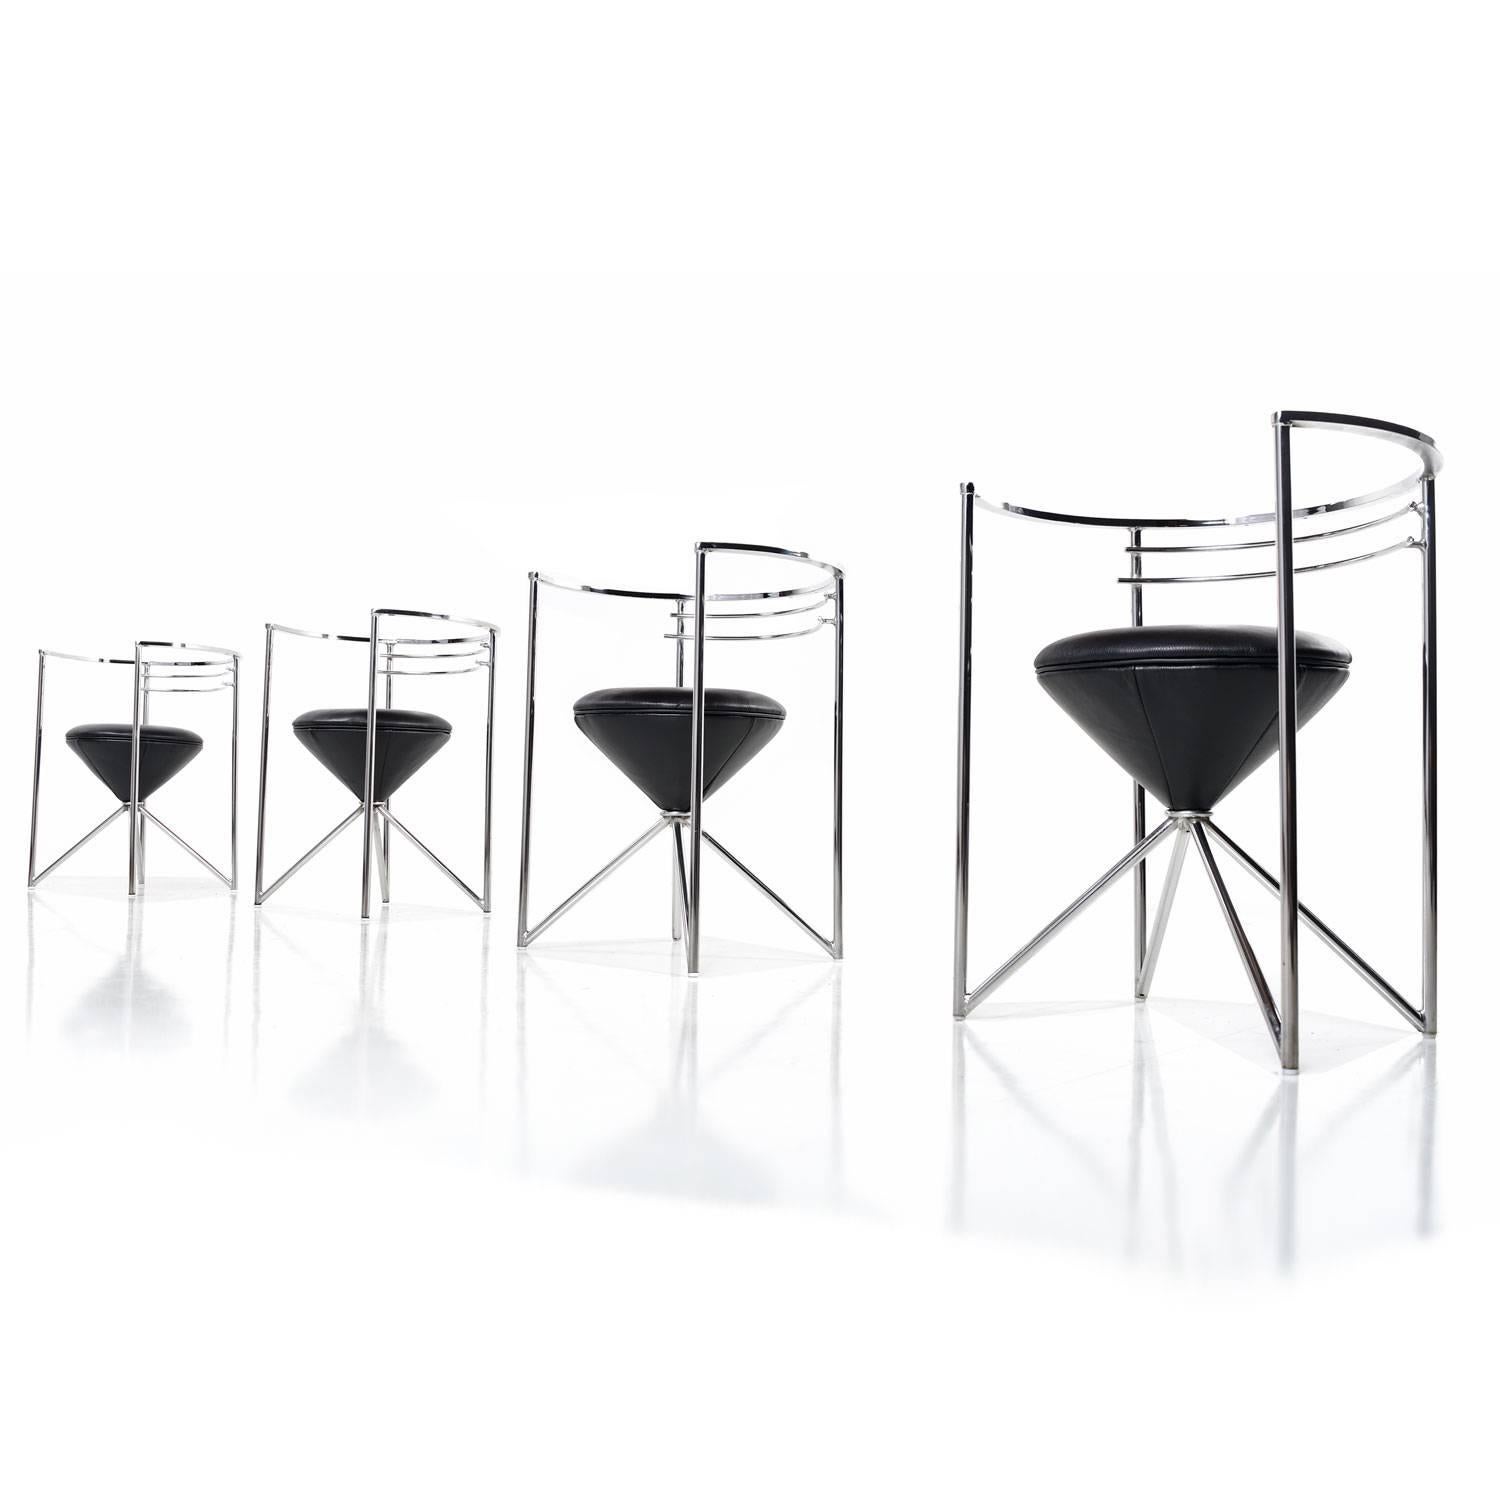 Made by Minson of California, this chrome dining set is the perfect mix of Mid-Century Modern and Art Deco design.  Straight architectural construction intermingles with curved lines to create a beautiful balance of function and form.  

-- Brand